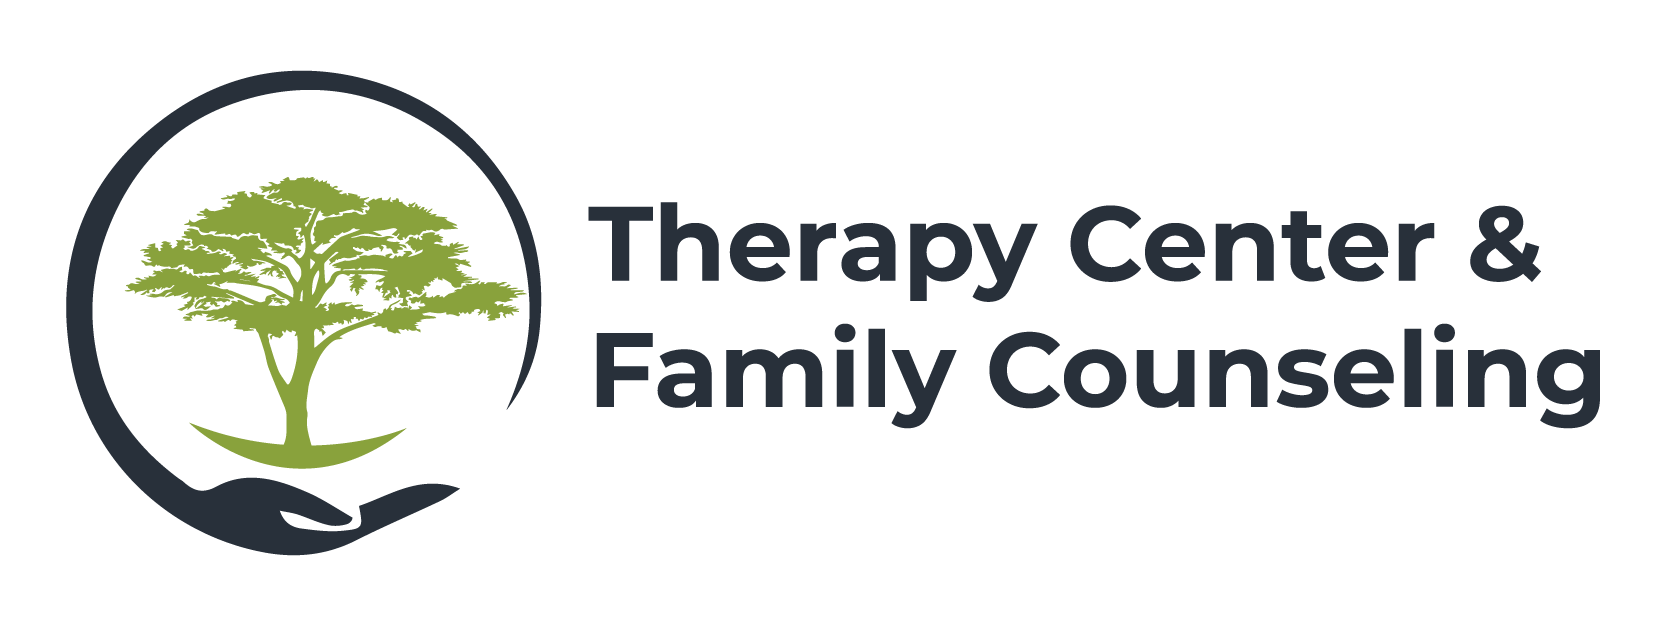 Therapy Center & Family Counseling